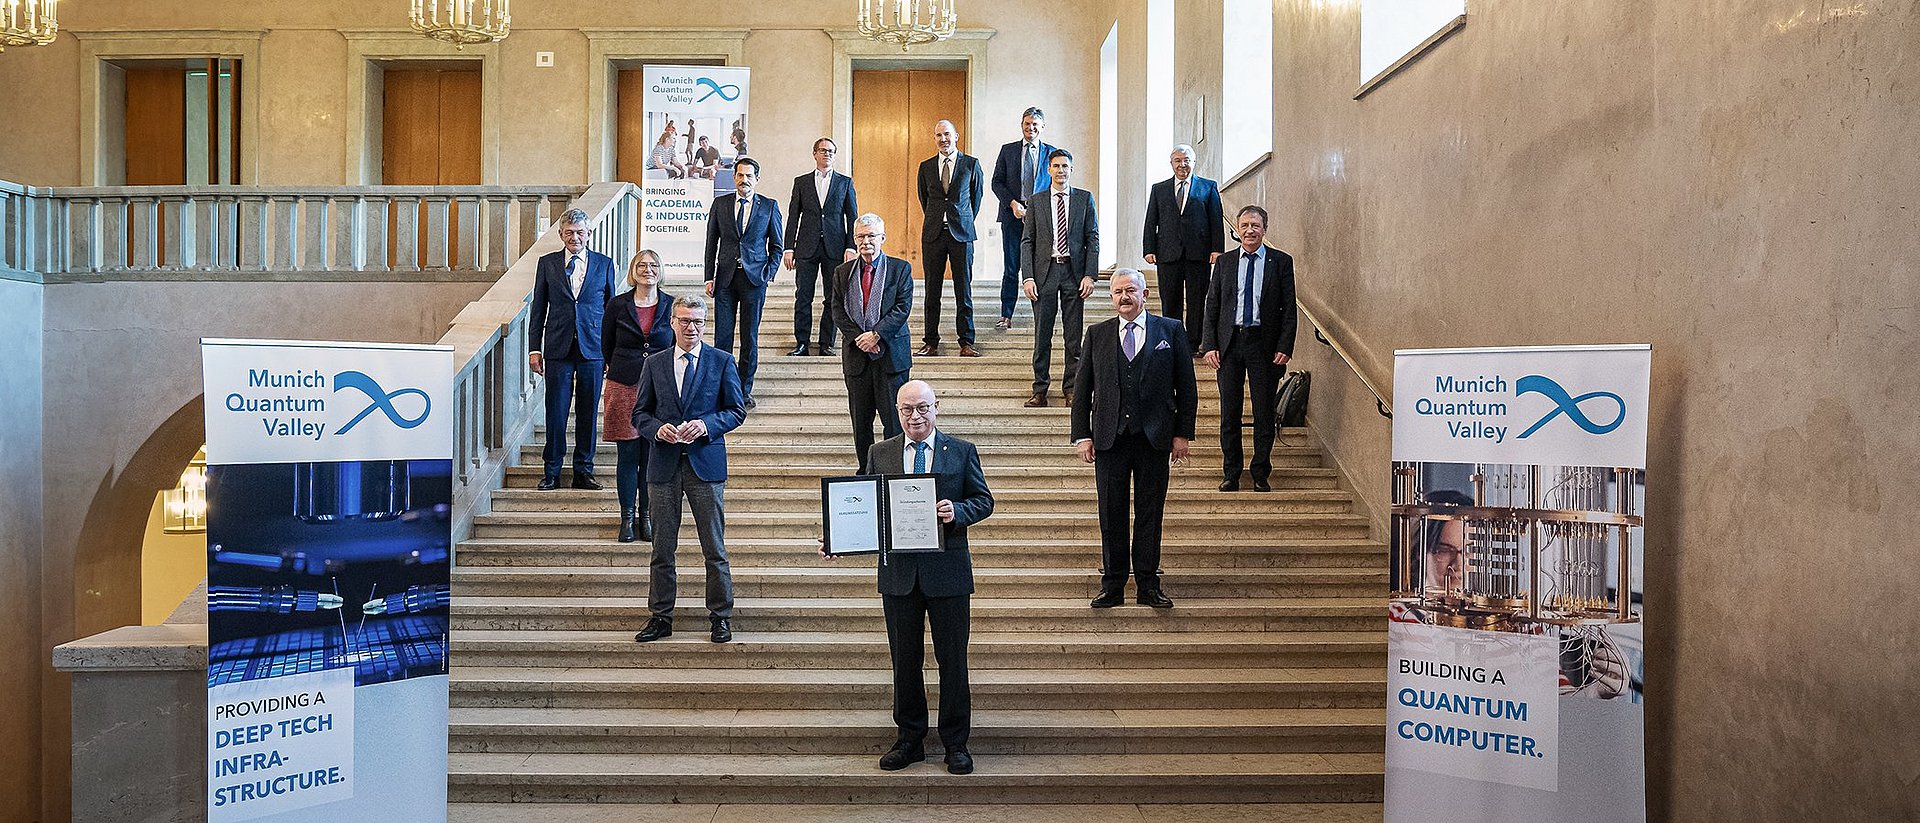 With the ceremonial signing of the founding document, Munich Quantum Valley has now also been formally founded. In addition to the TUM, the founding partners of the Munich Quantum Valley are the Ludwig-Maximilians-Universität München (LMU) and the Friedrich-Alexander-Universität Erlangen-Nürnberg (FAU) as well as the Bavarian Academy of Sciences, the German Aerospace Center, the Fraunhofer Gesellschaft and the Max Planck Society.